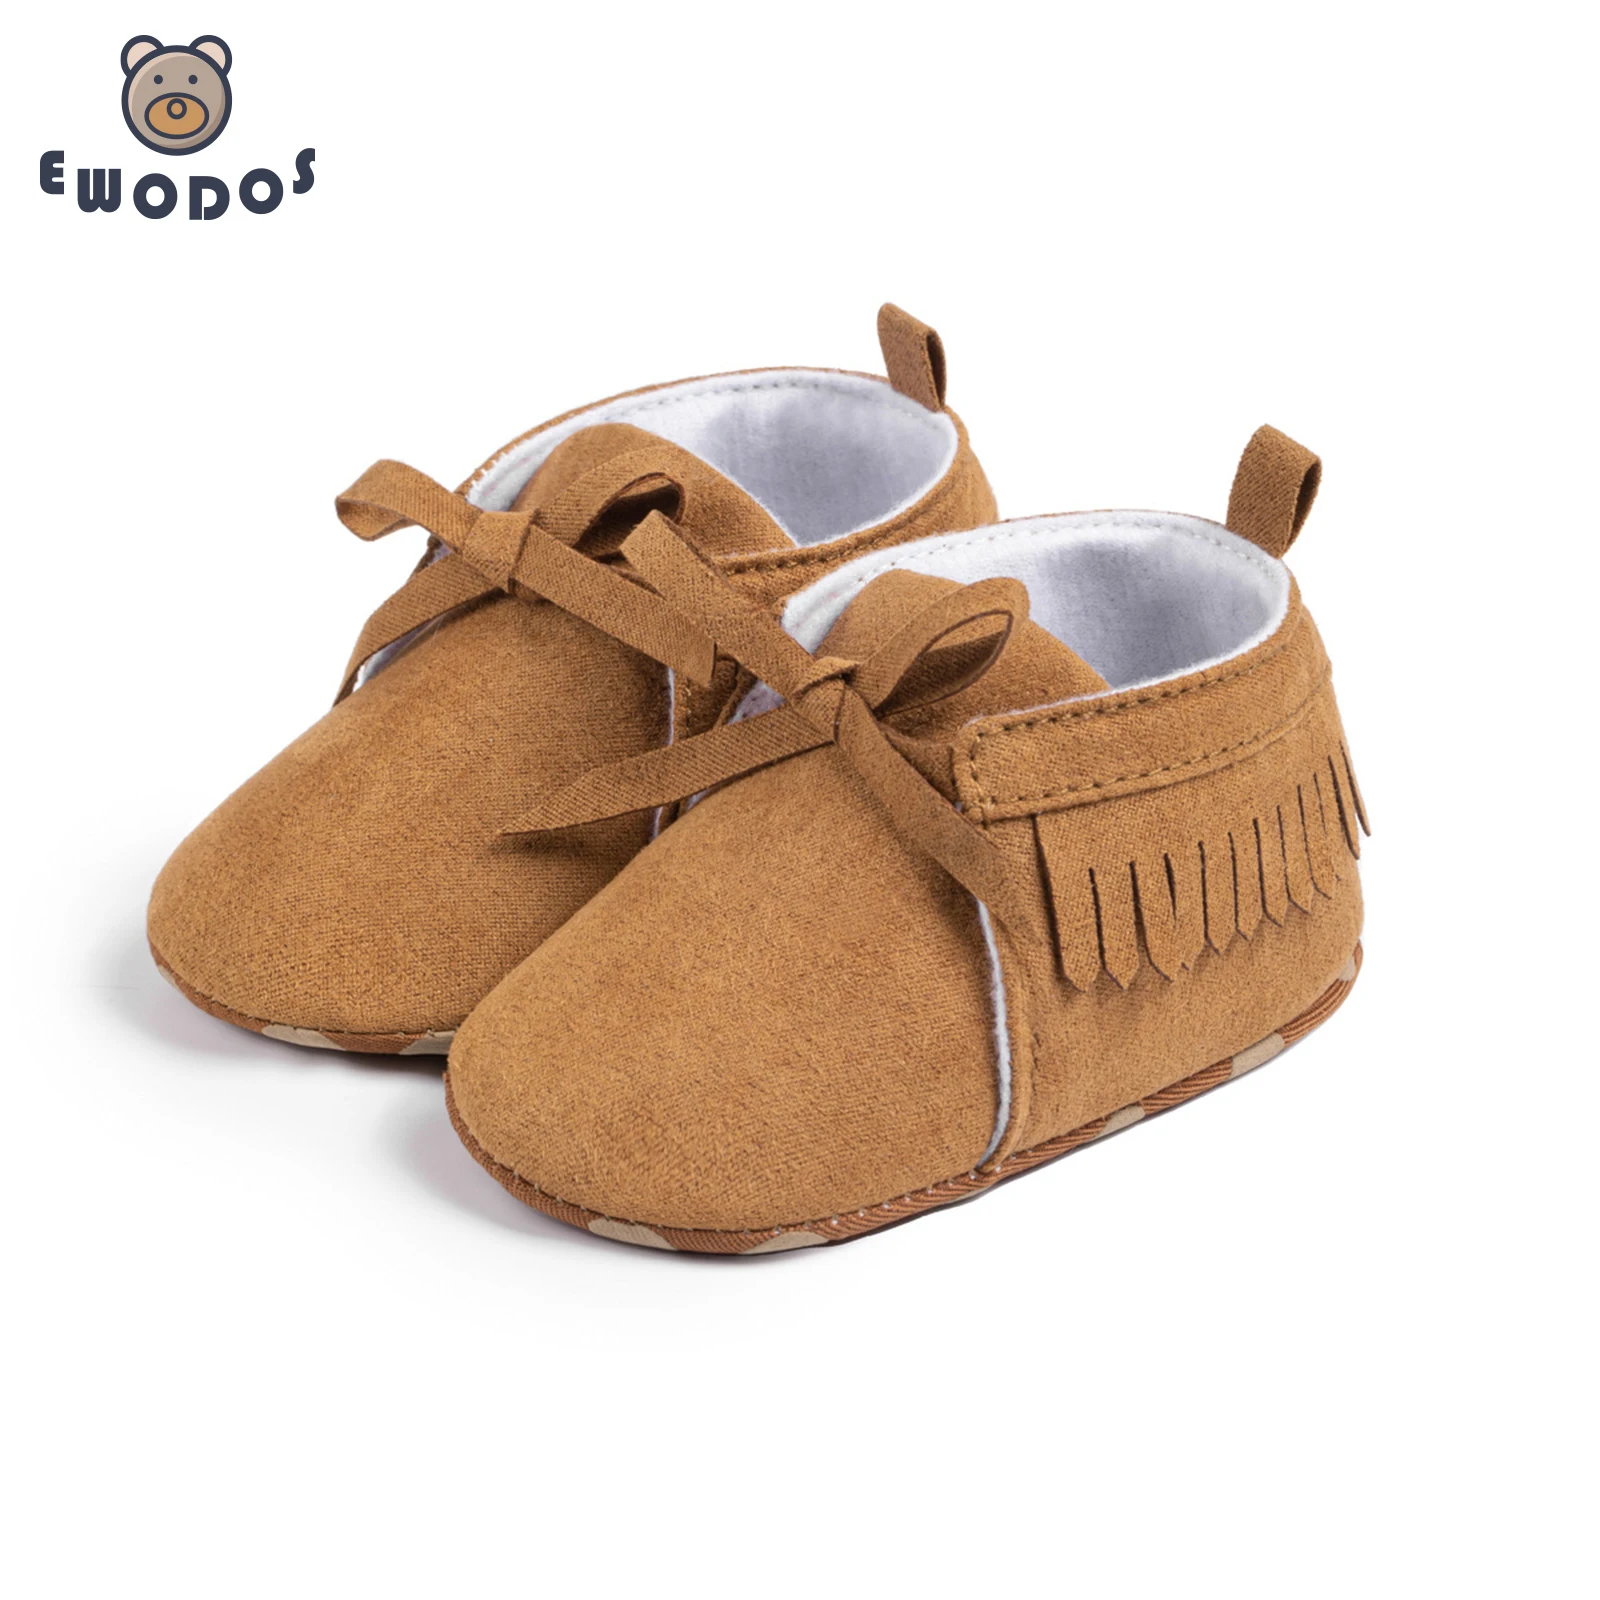 

EWODOS Toddler Baby Girls Casual Flats Shoes Infant Kids Tassels Soft Sole First Walker Crib Shoes for Festival Baby Shower